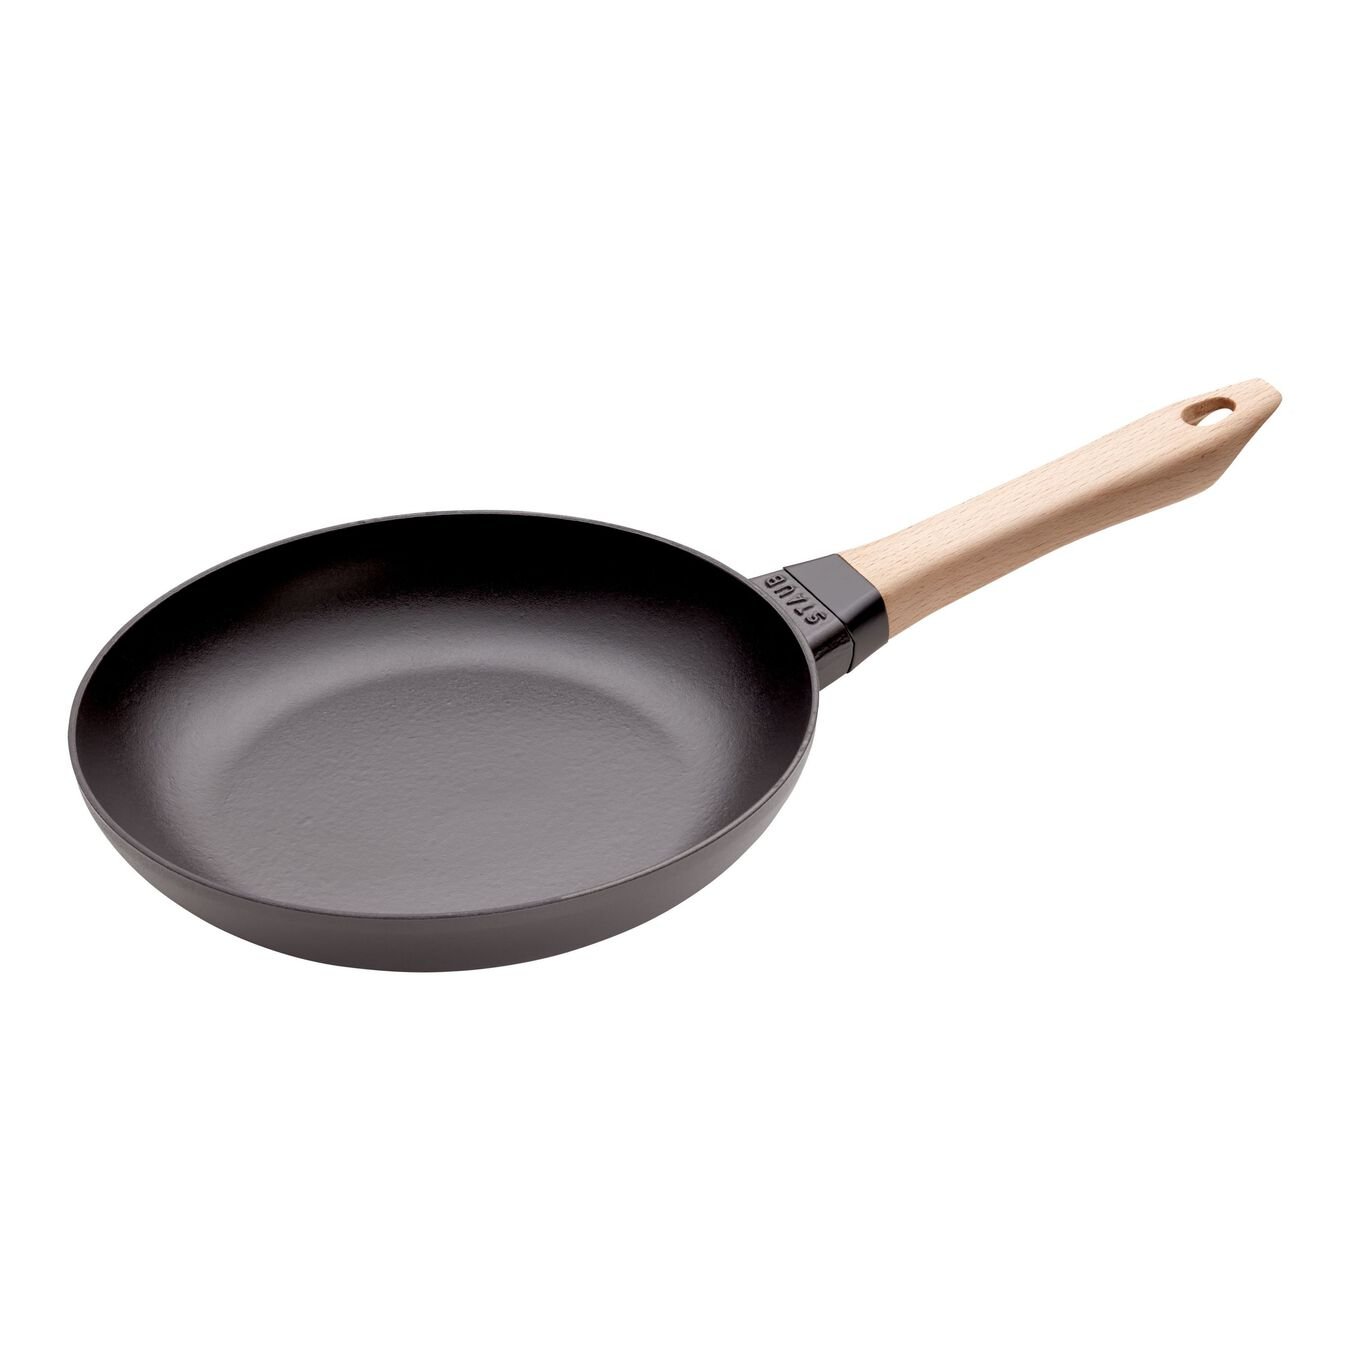 Buy Staub Pans Frying pan with wooden handle | ZWILLING.COM